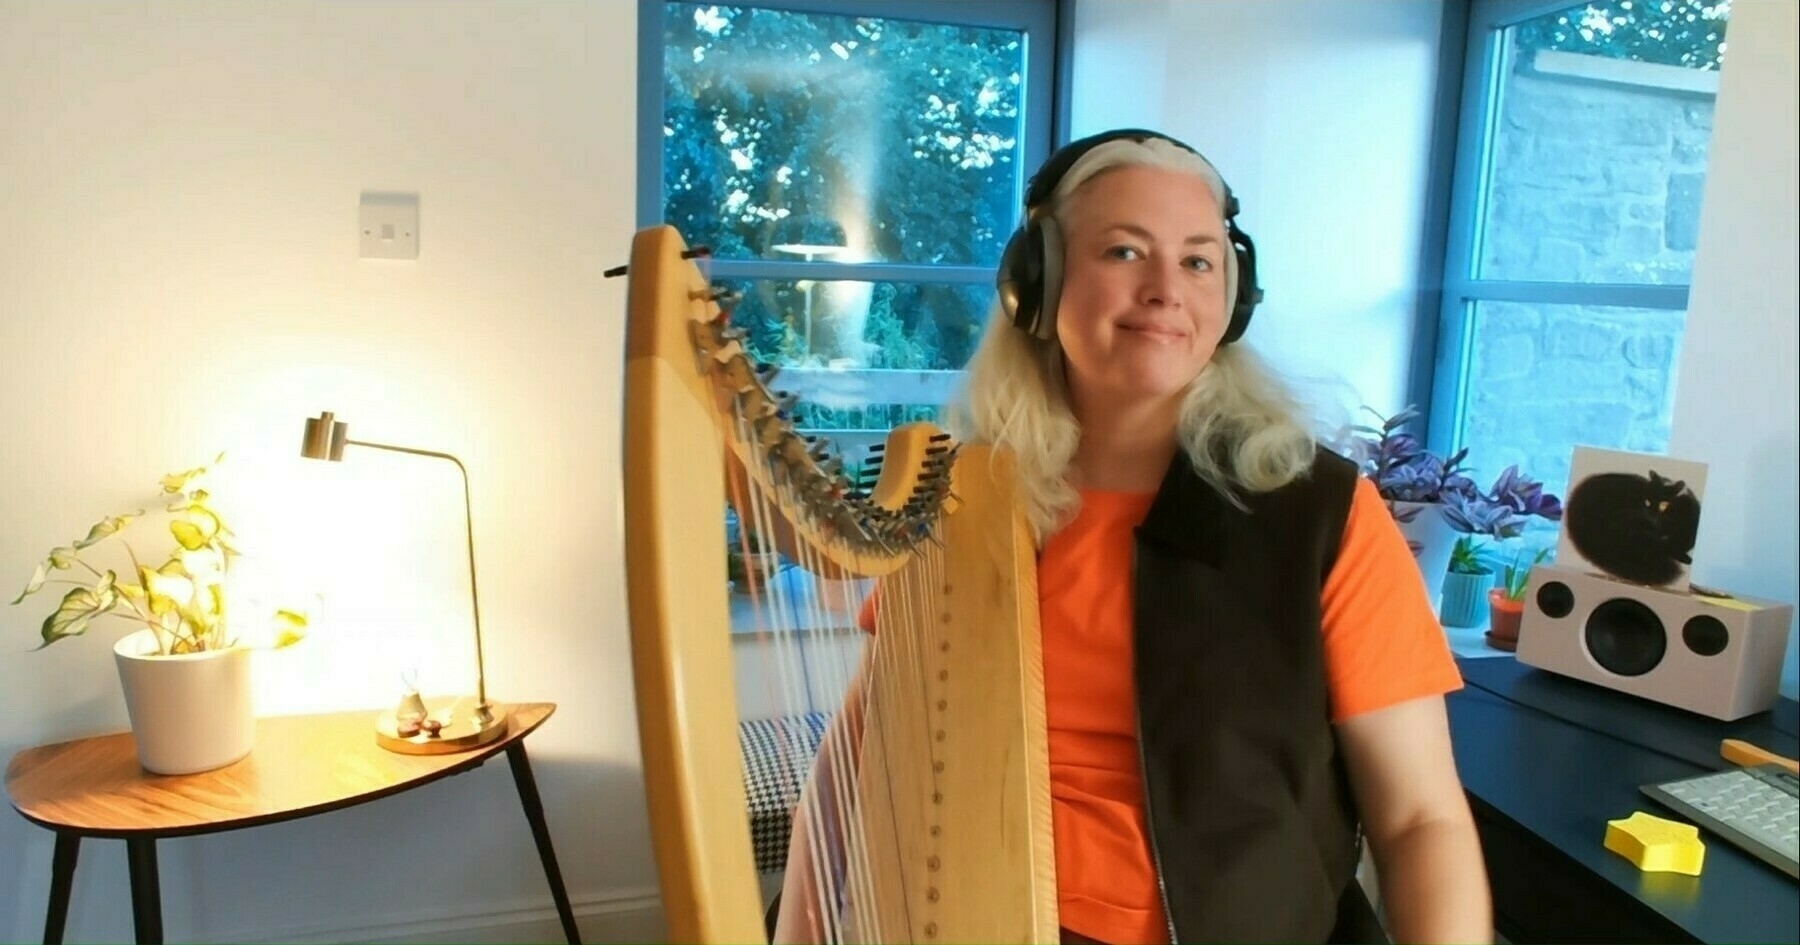 a female, sitting on a chair, looking at the camera in an orange t-shirt holding a harp.